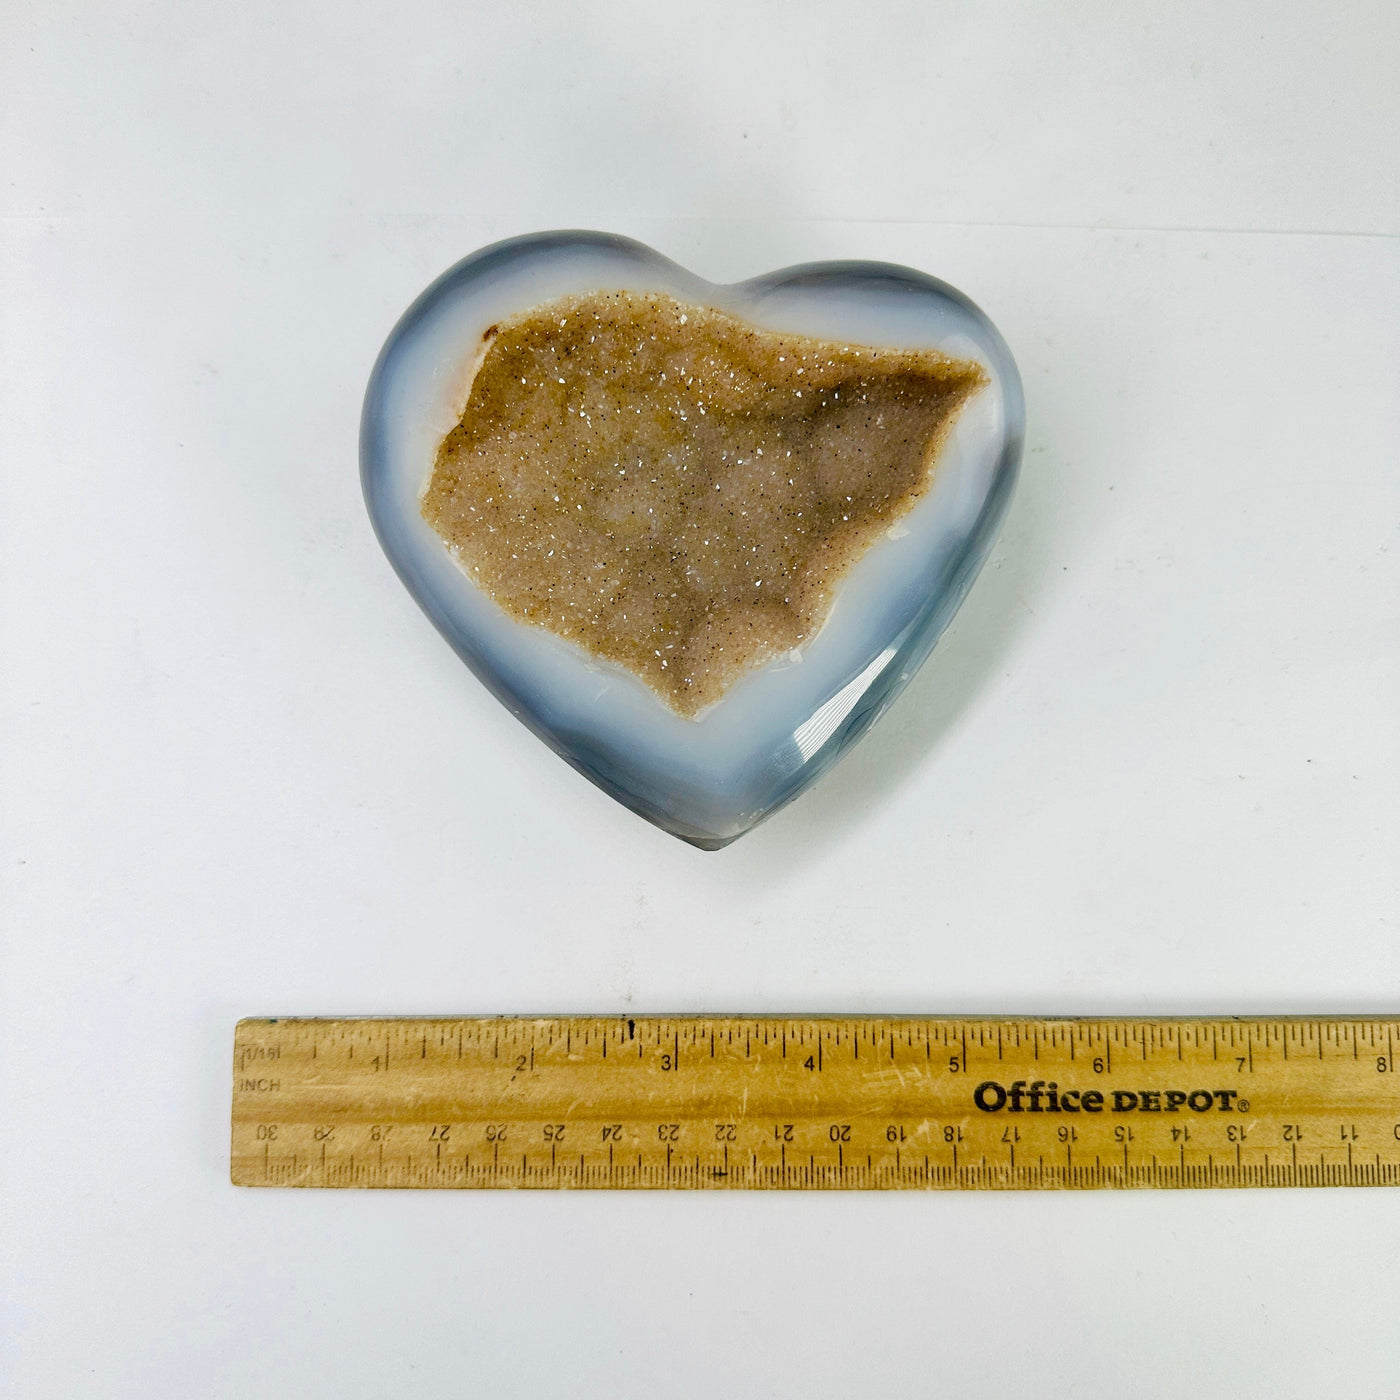 Agate Geode Heart with Druzy - Polished Crystal Heart top view with ruler for size reference